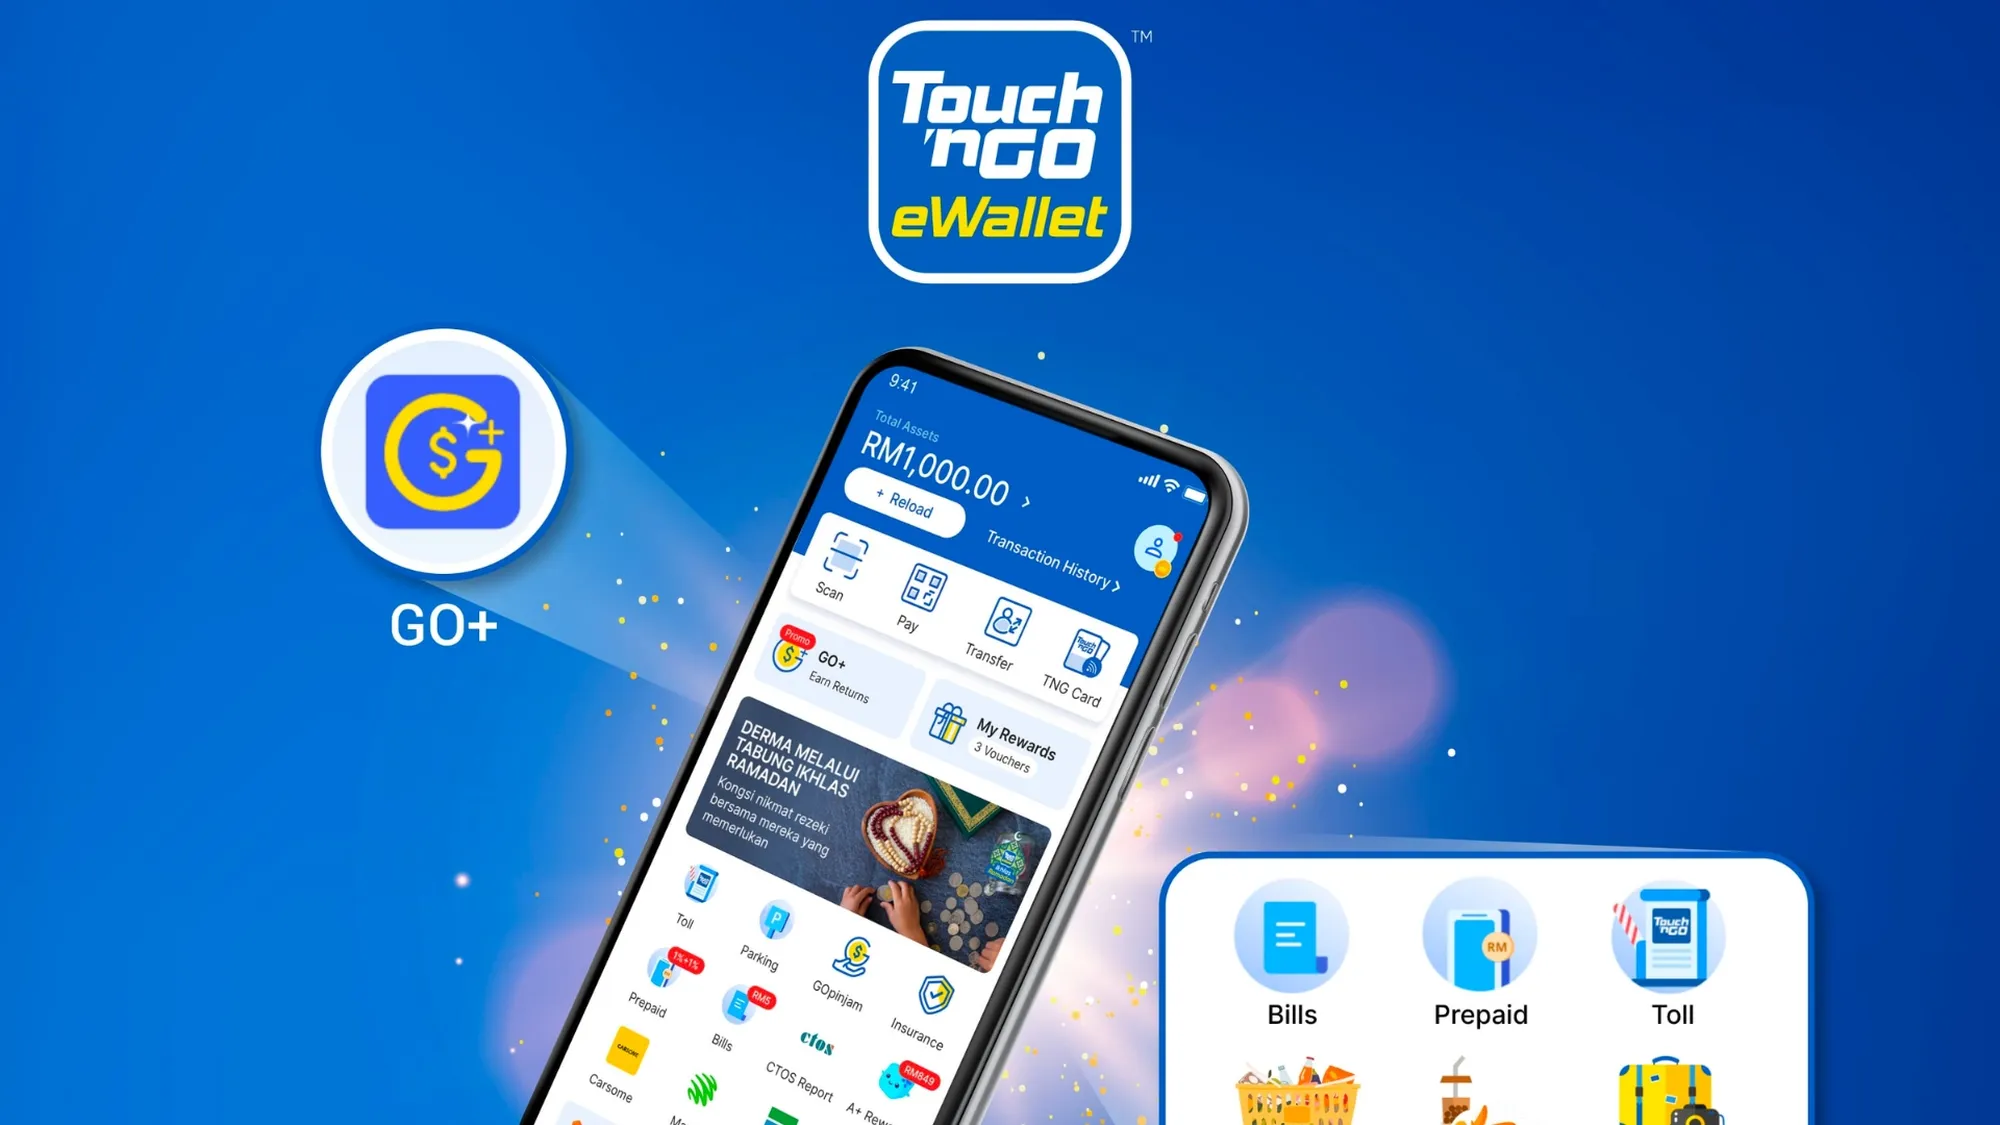 how to register and activate topup touch n go ewallet